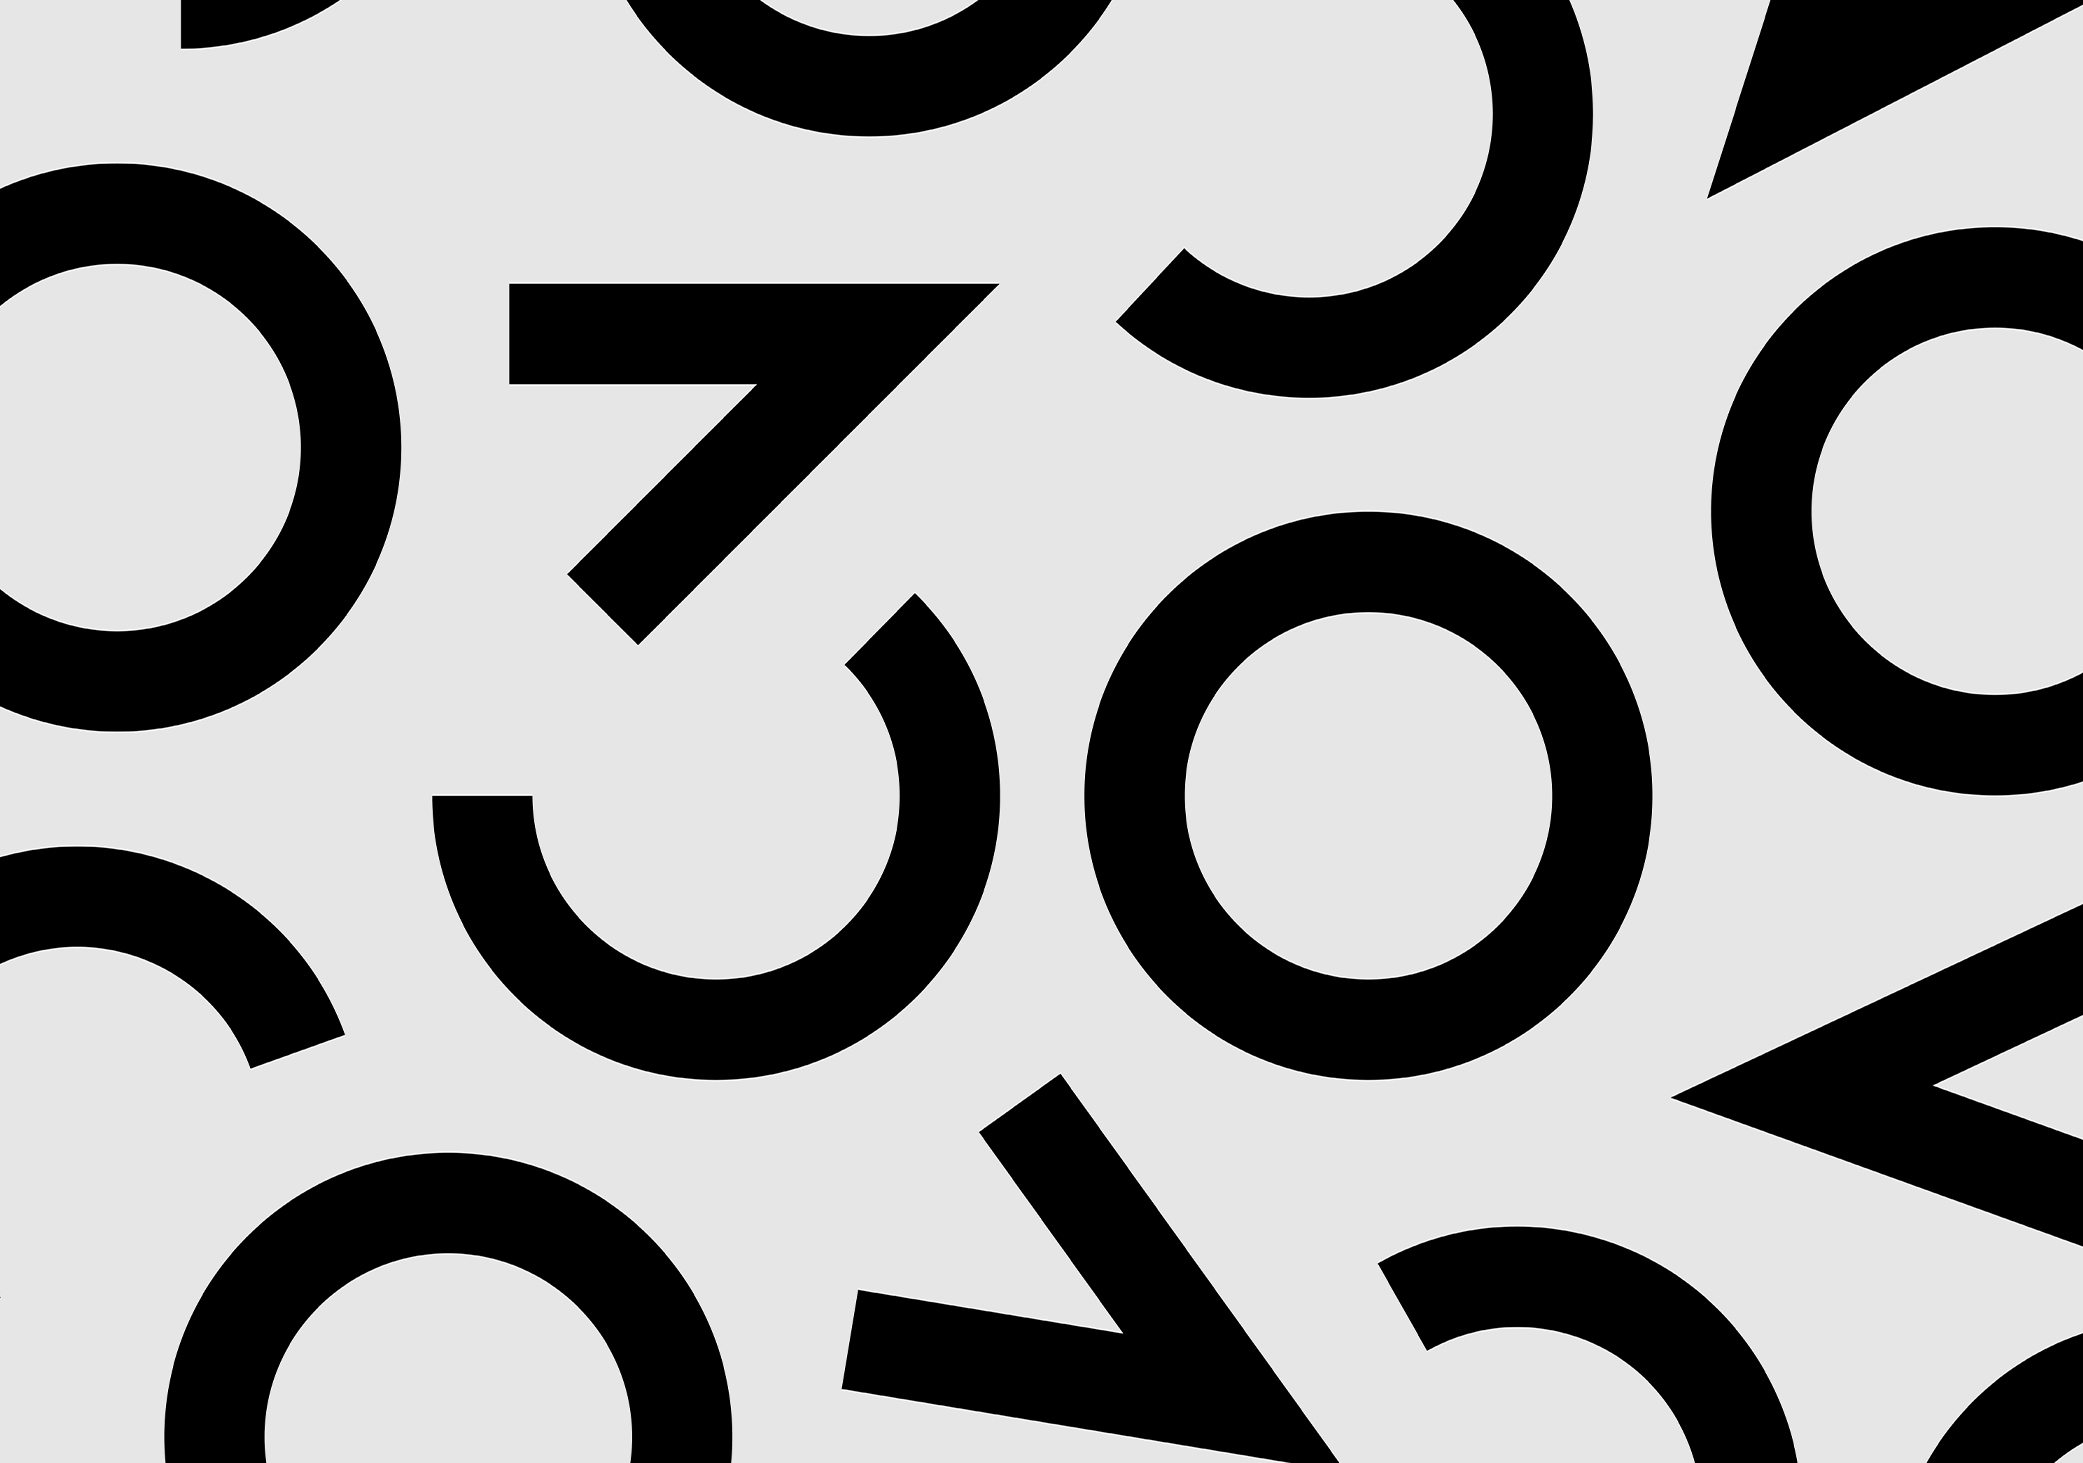 Graphic brand pattern using the letters C and O